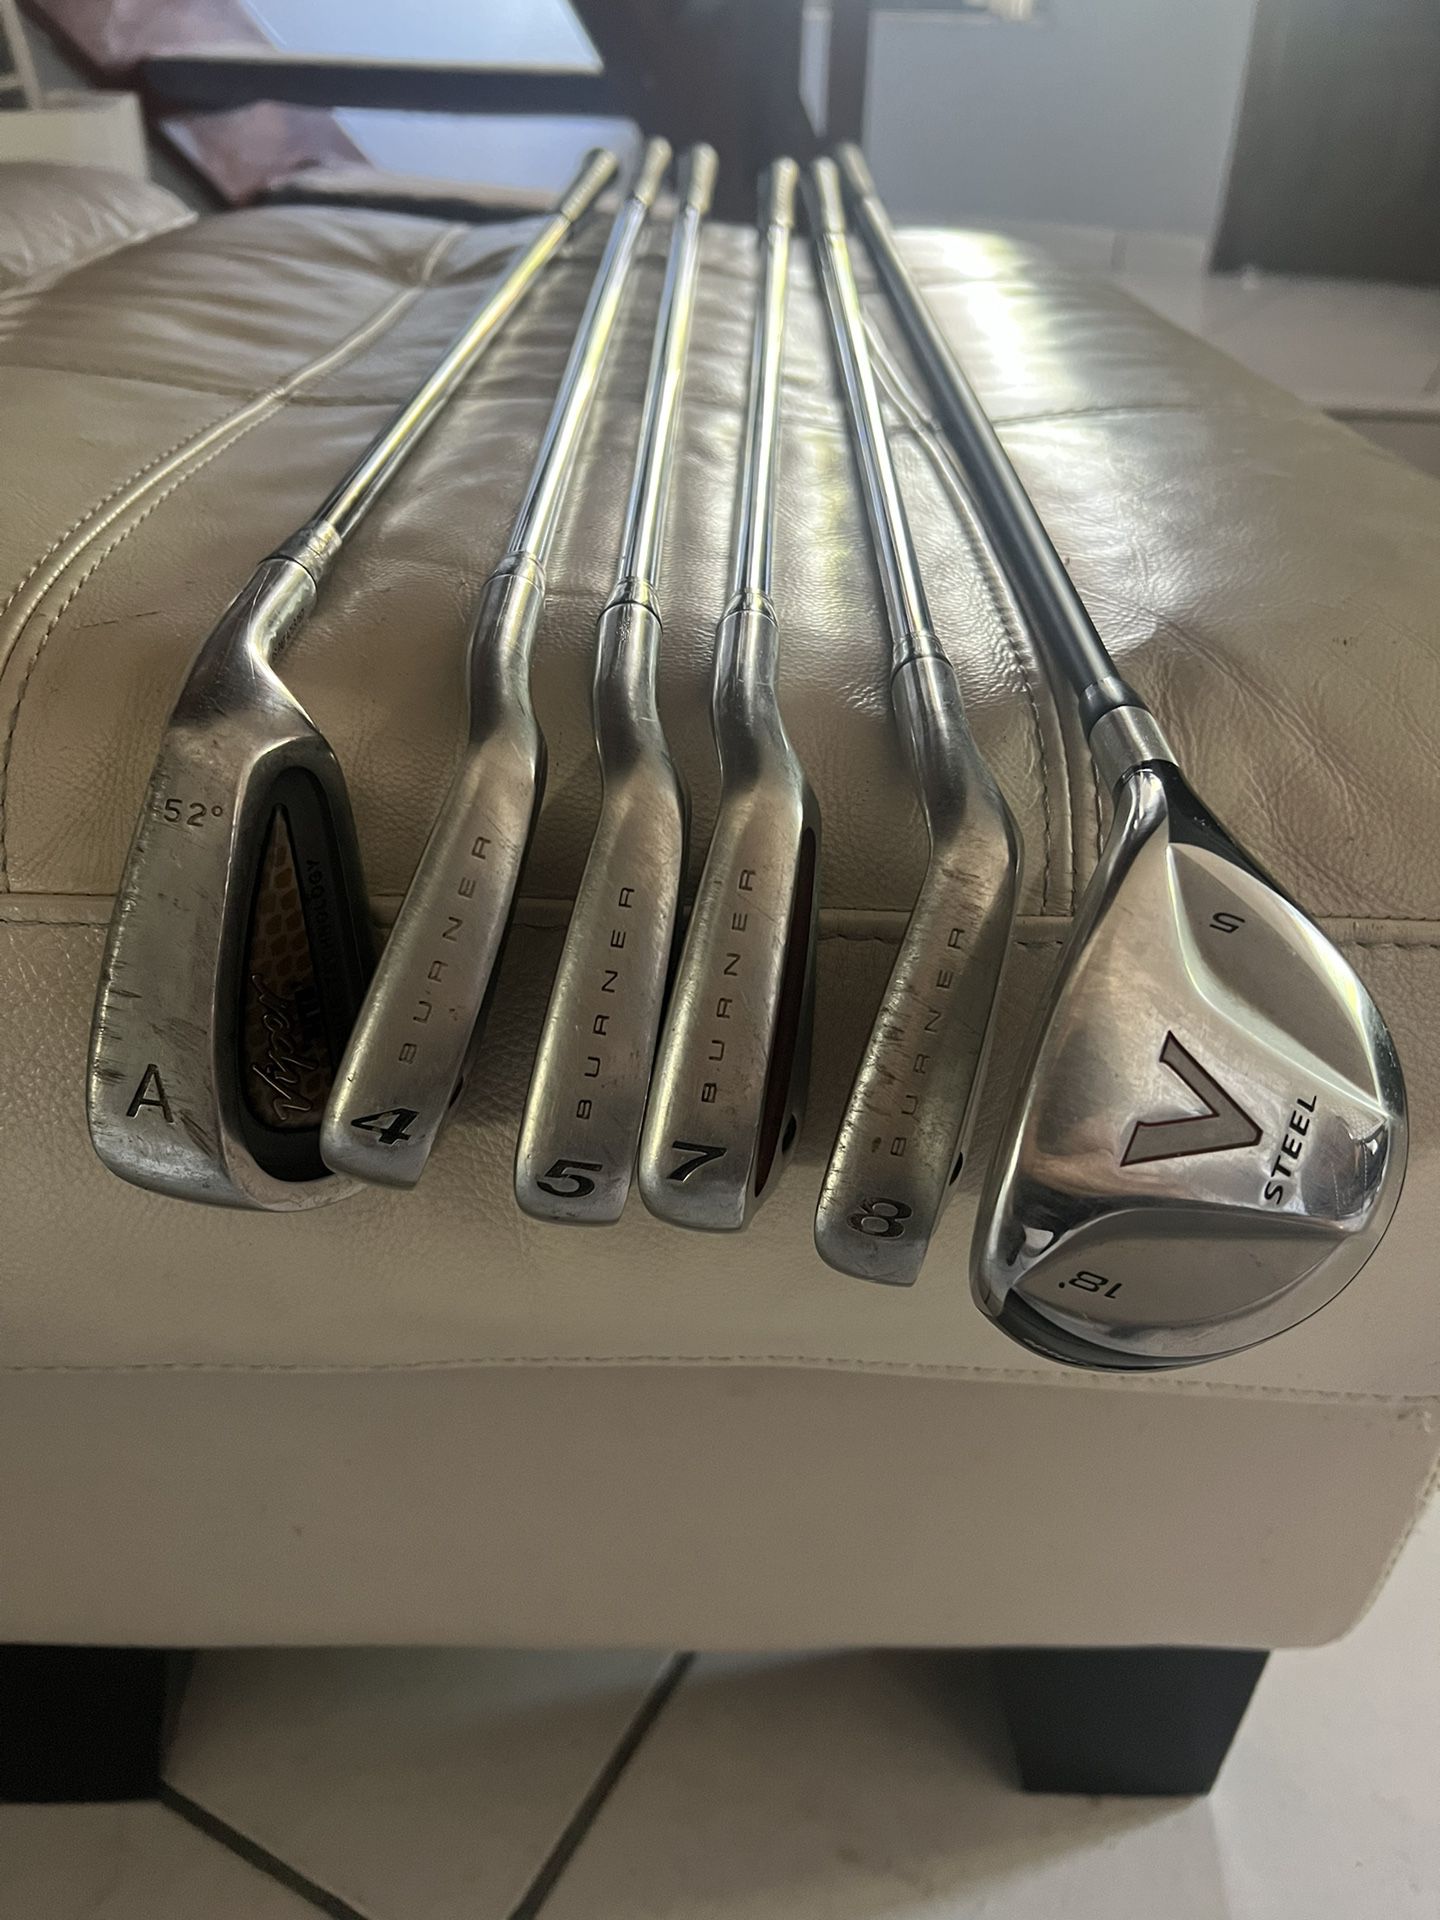 Assorted Golf Clubs Taylor Made Burner Irons, Viper Wedge 52 Degree, Taylor Made V Steel Fairway Wood 5  